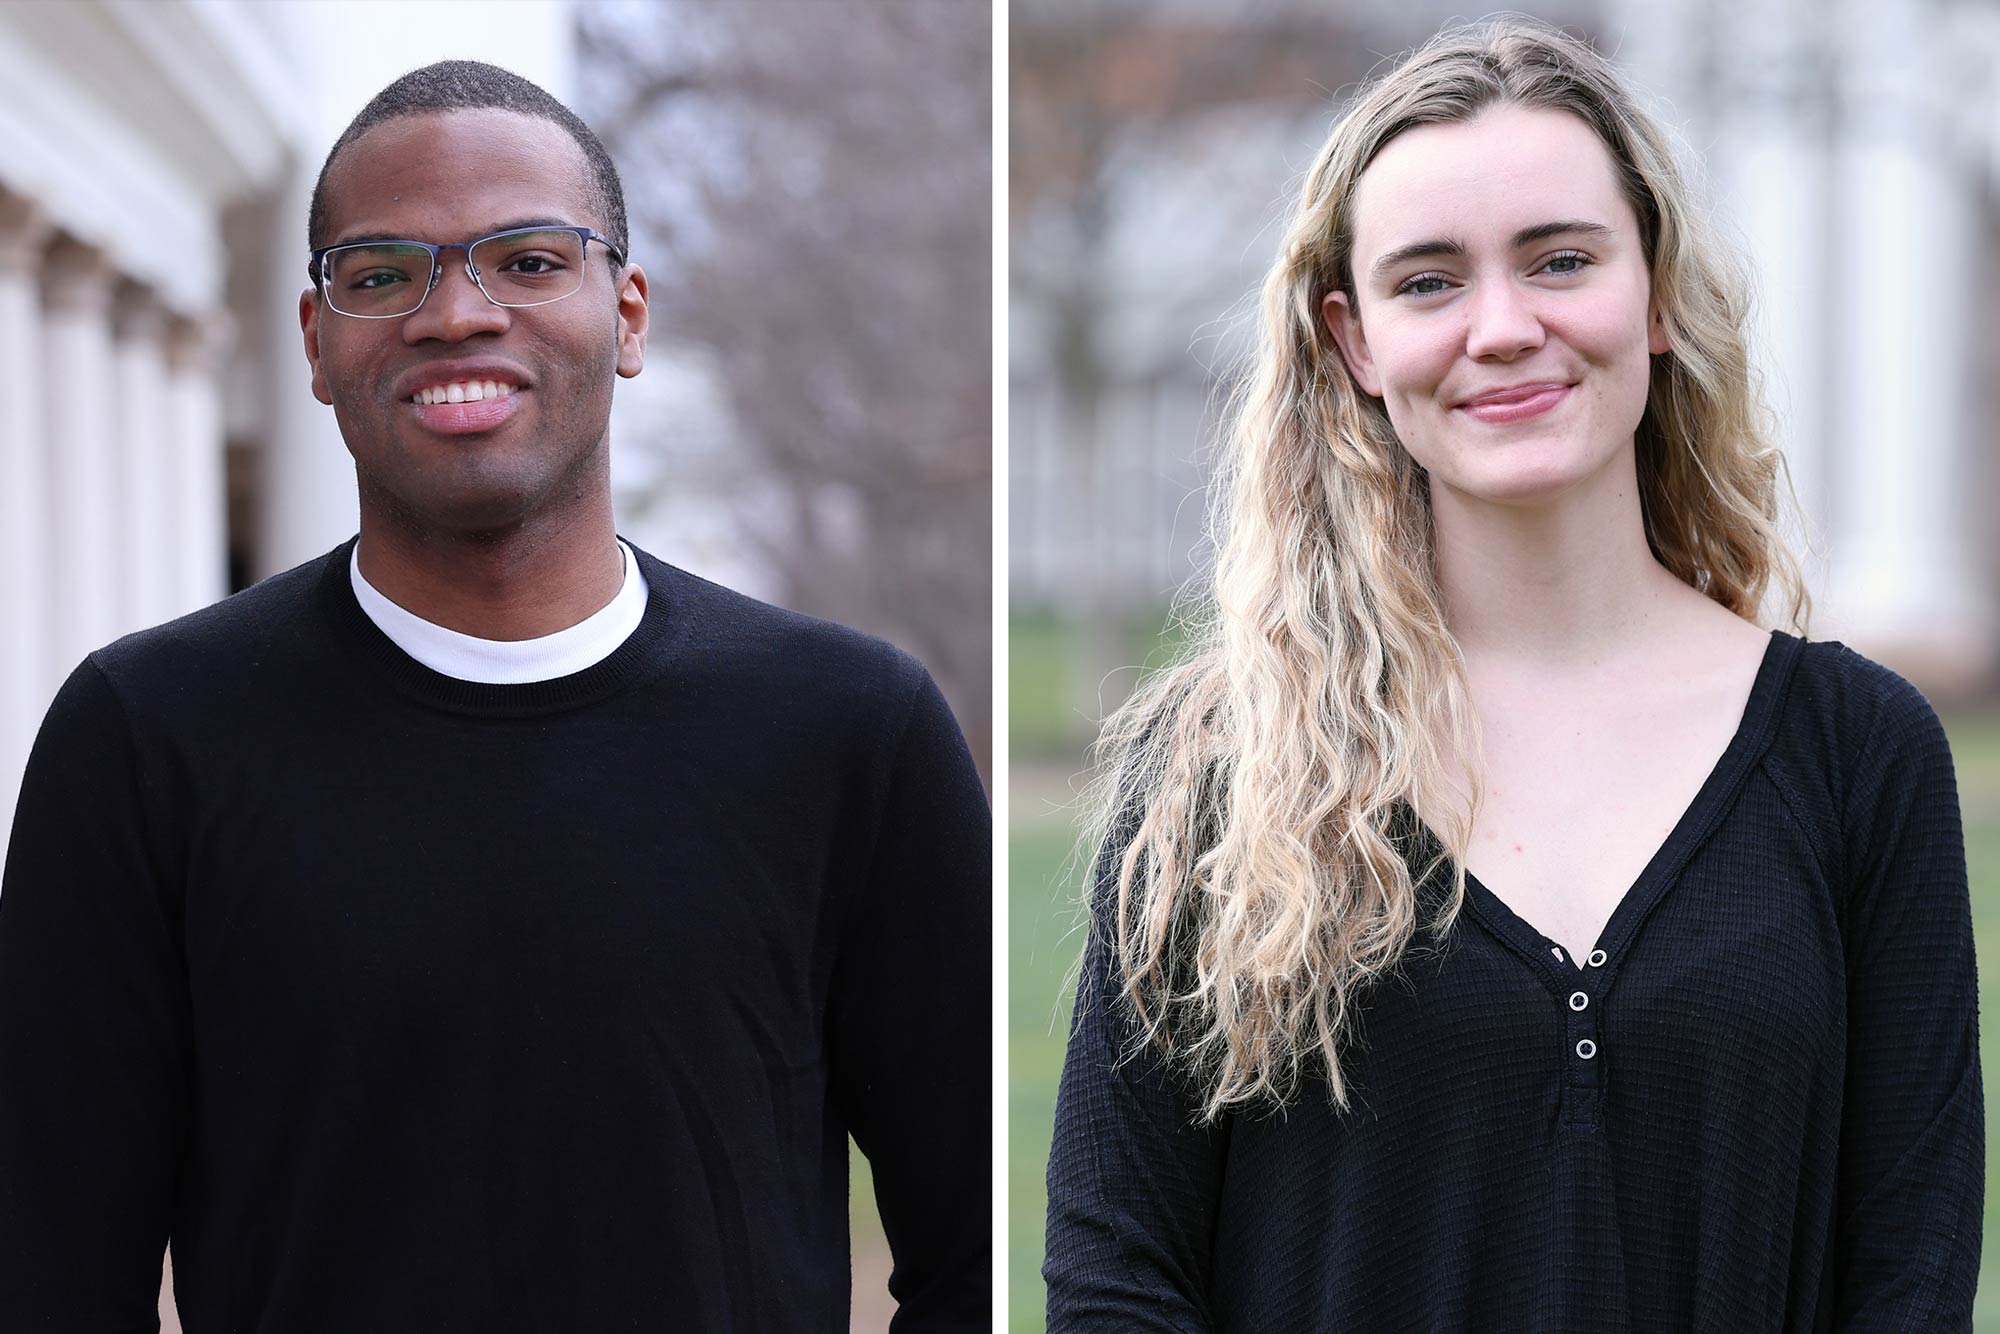 Portraits of Jered Cooper, left, and Skye Snider, right